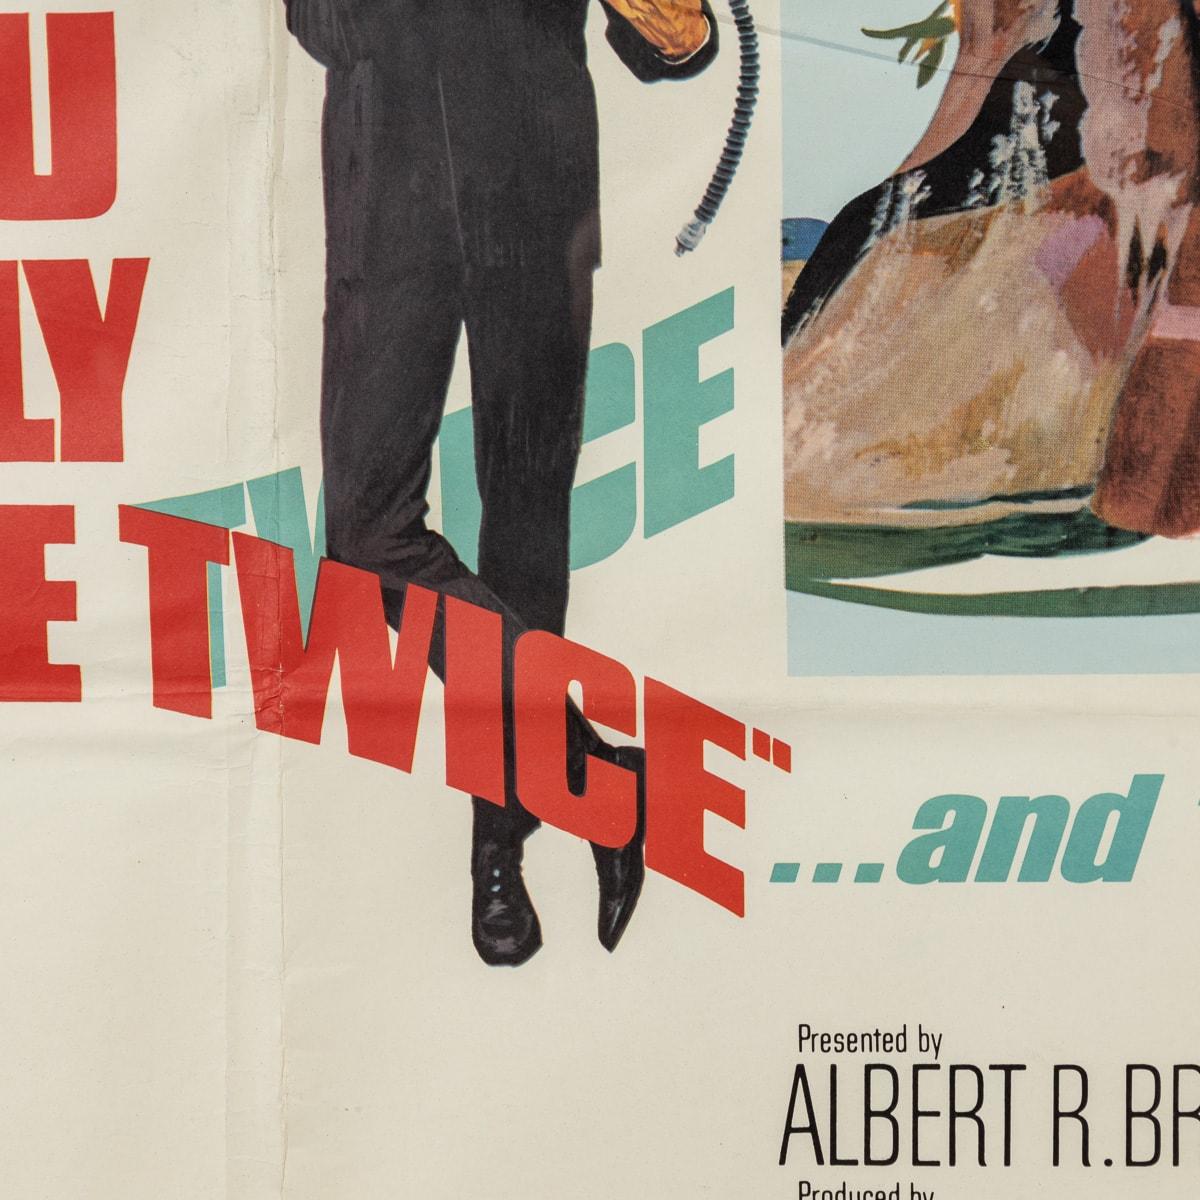 20th Century Original U.S Release James Bond 007 'You Only Live Twice' Subway C Poster c.1967 For Sale